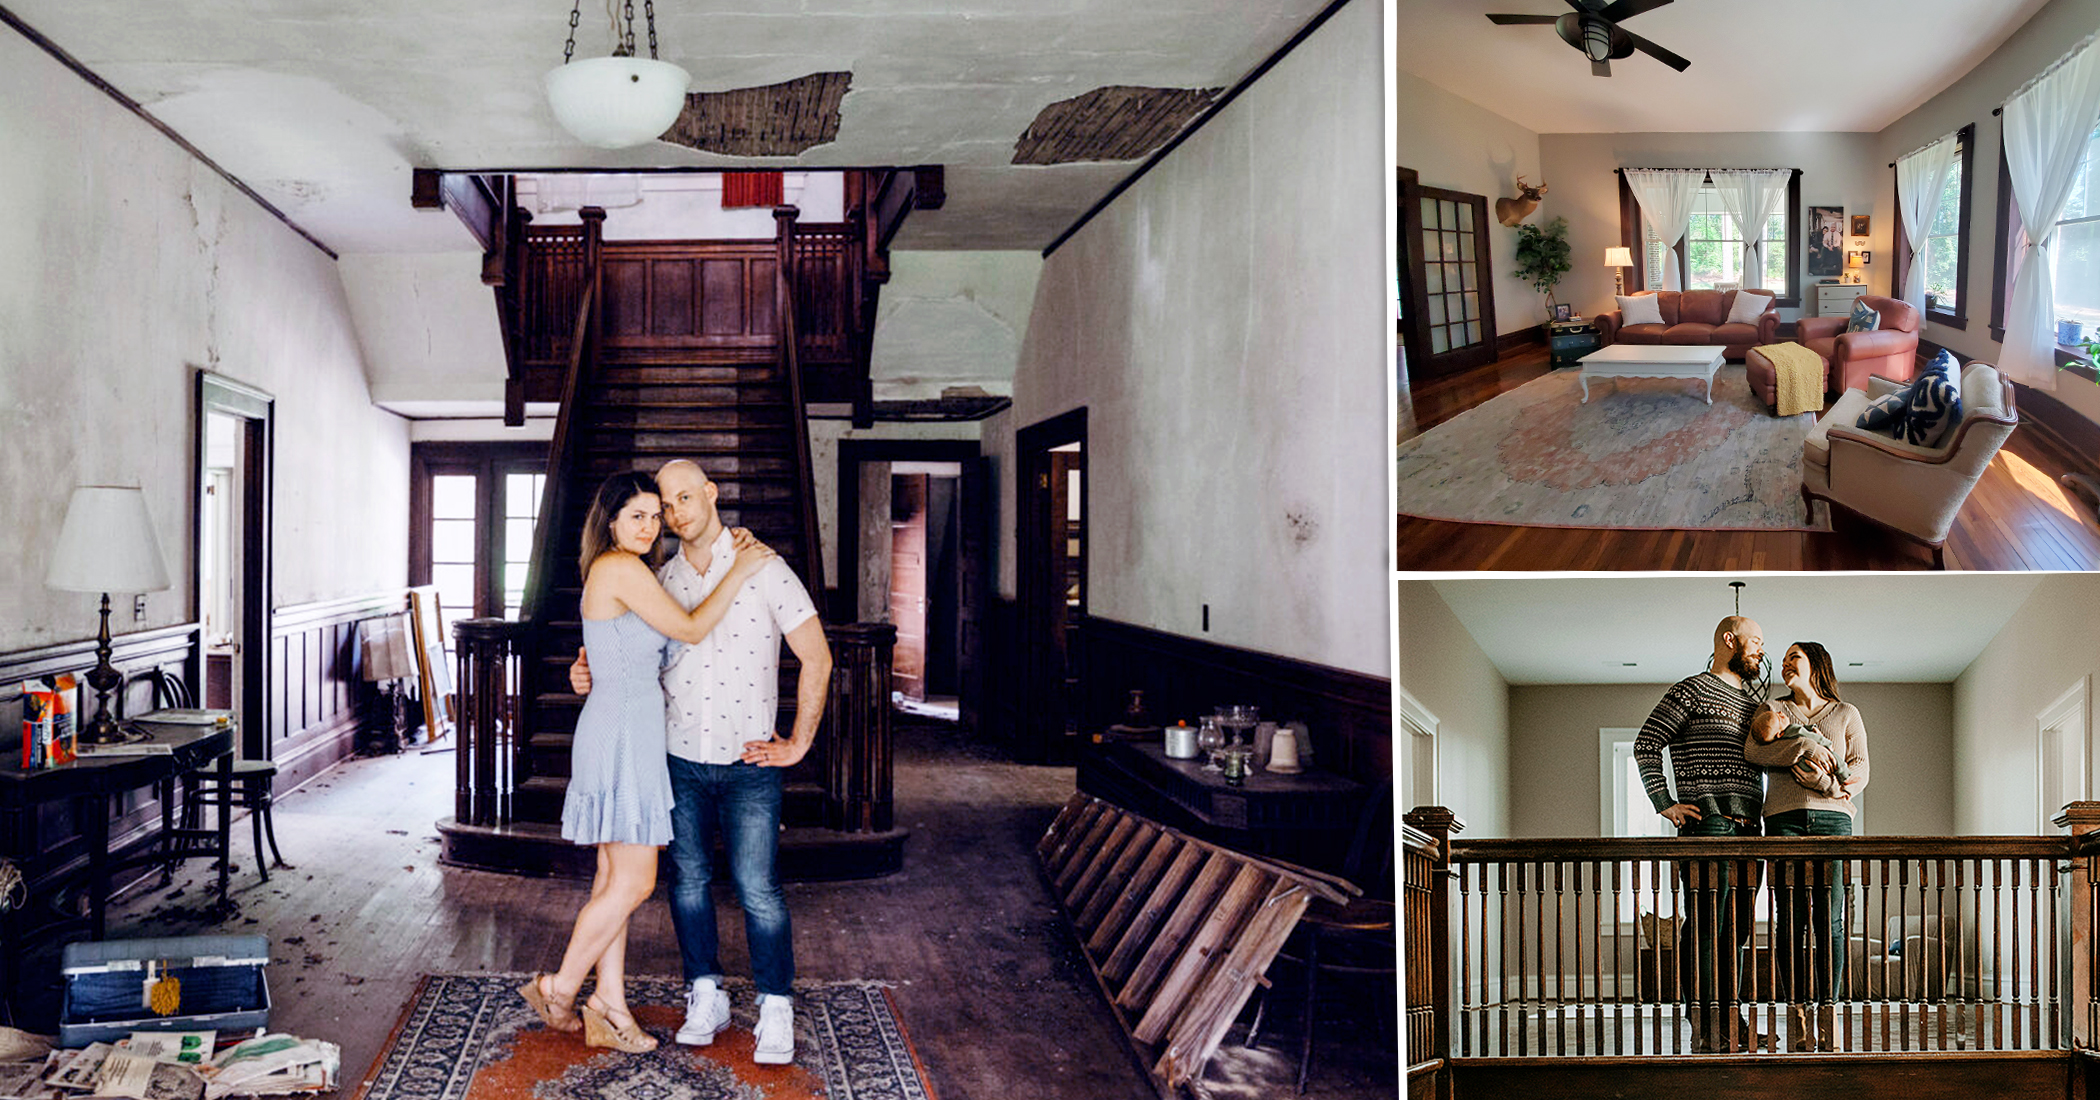  Couple Buys 109-Year-Old Mansion, Transforms It Into $900,000 Home for Their Son 